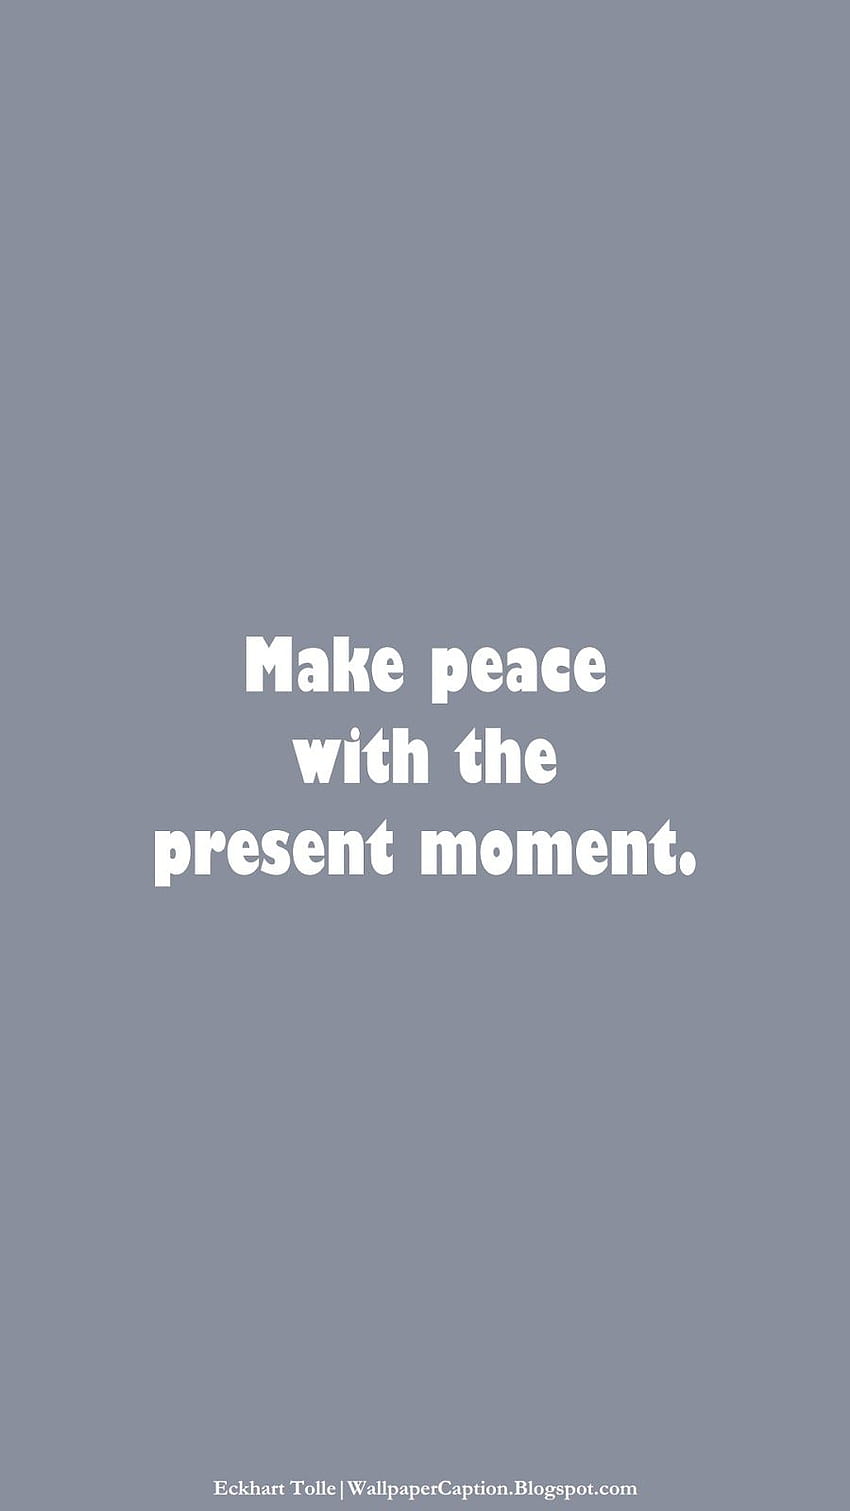 Phone with Short Quotes (Part 12.7 Grey Facebook) - Caption, Present Moment HD phone wallpaper